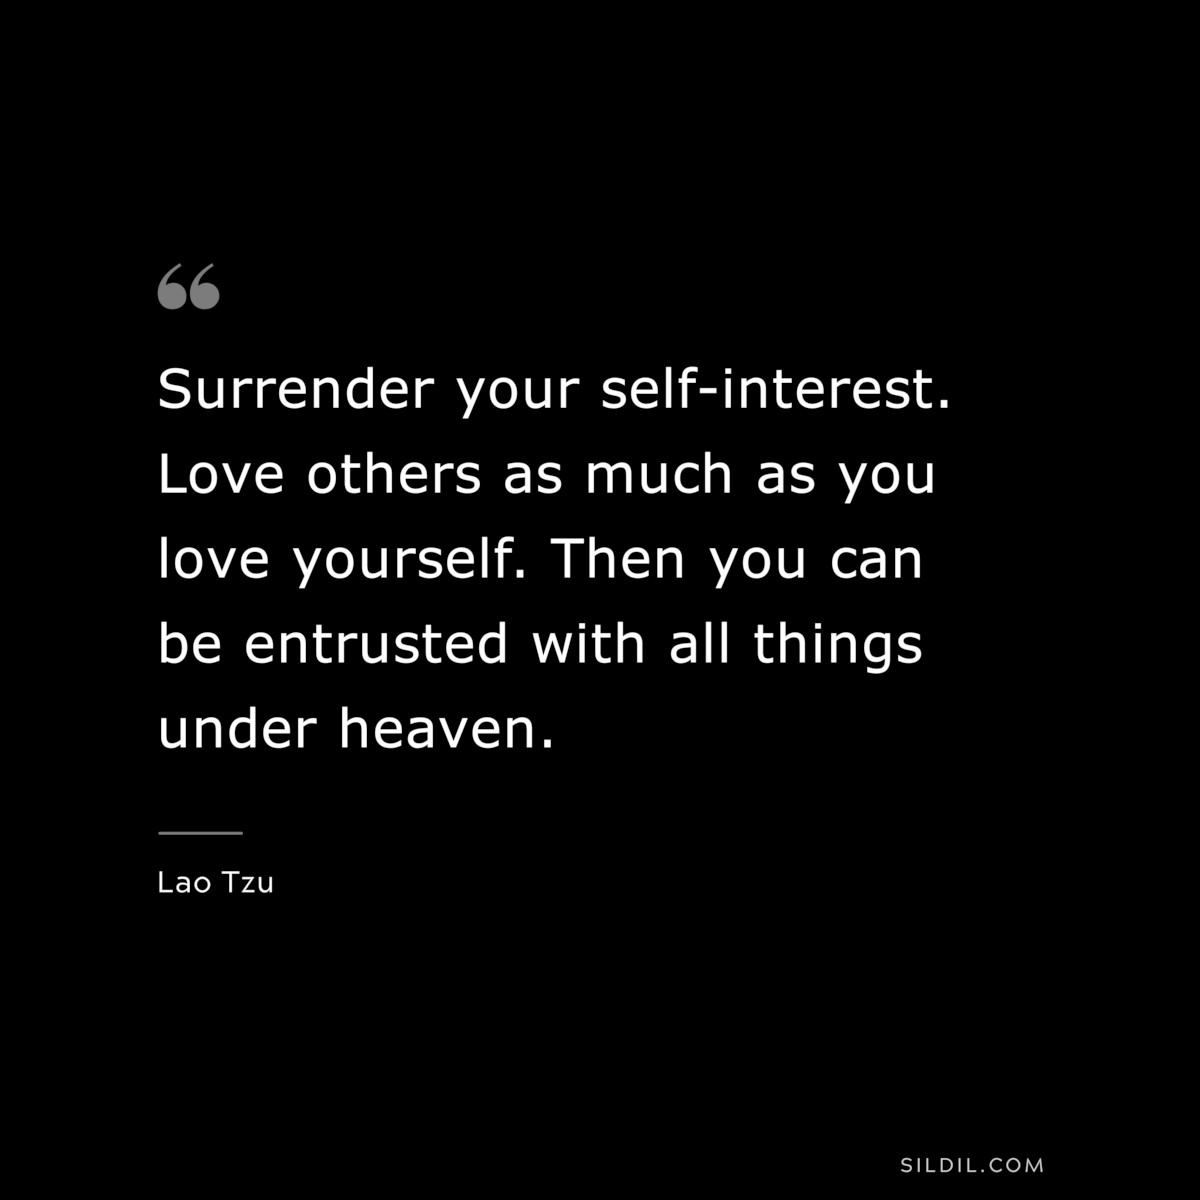 Surrender your self-interest. Love others as much as you love yourself. Then you can be entrusted with all things under heaven. ― Lao Tzu